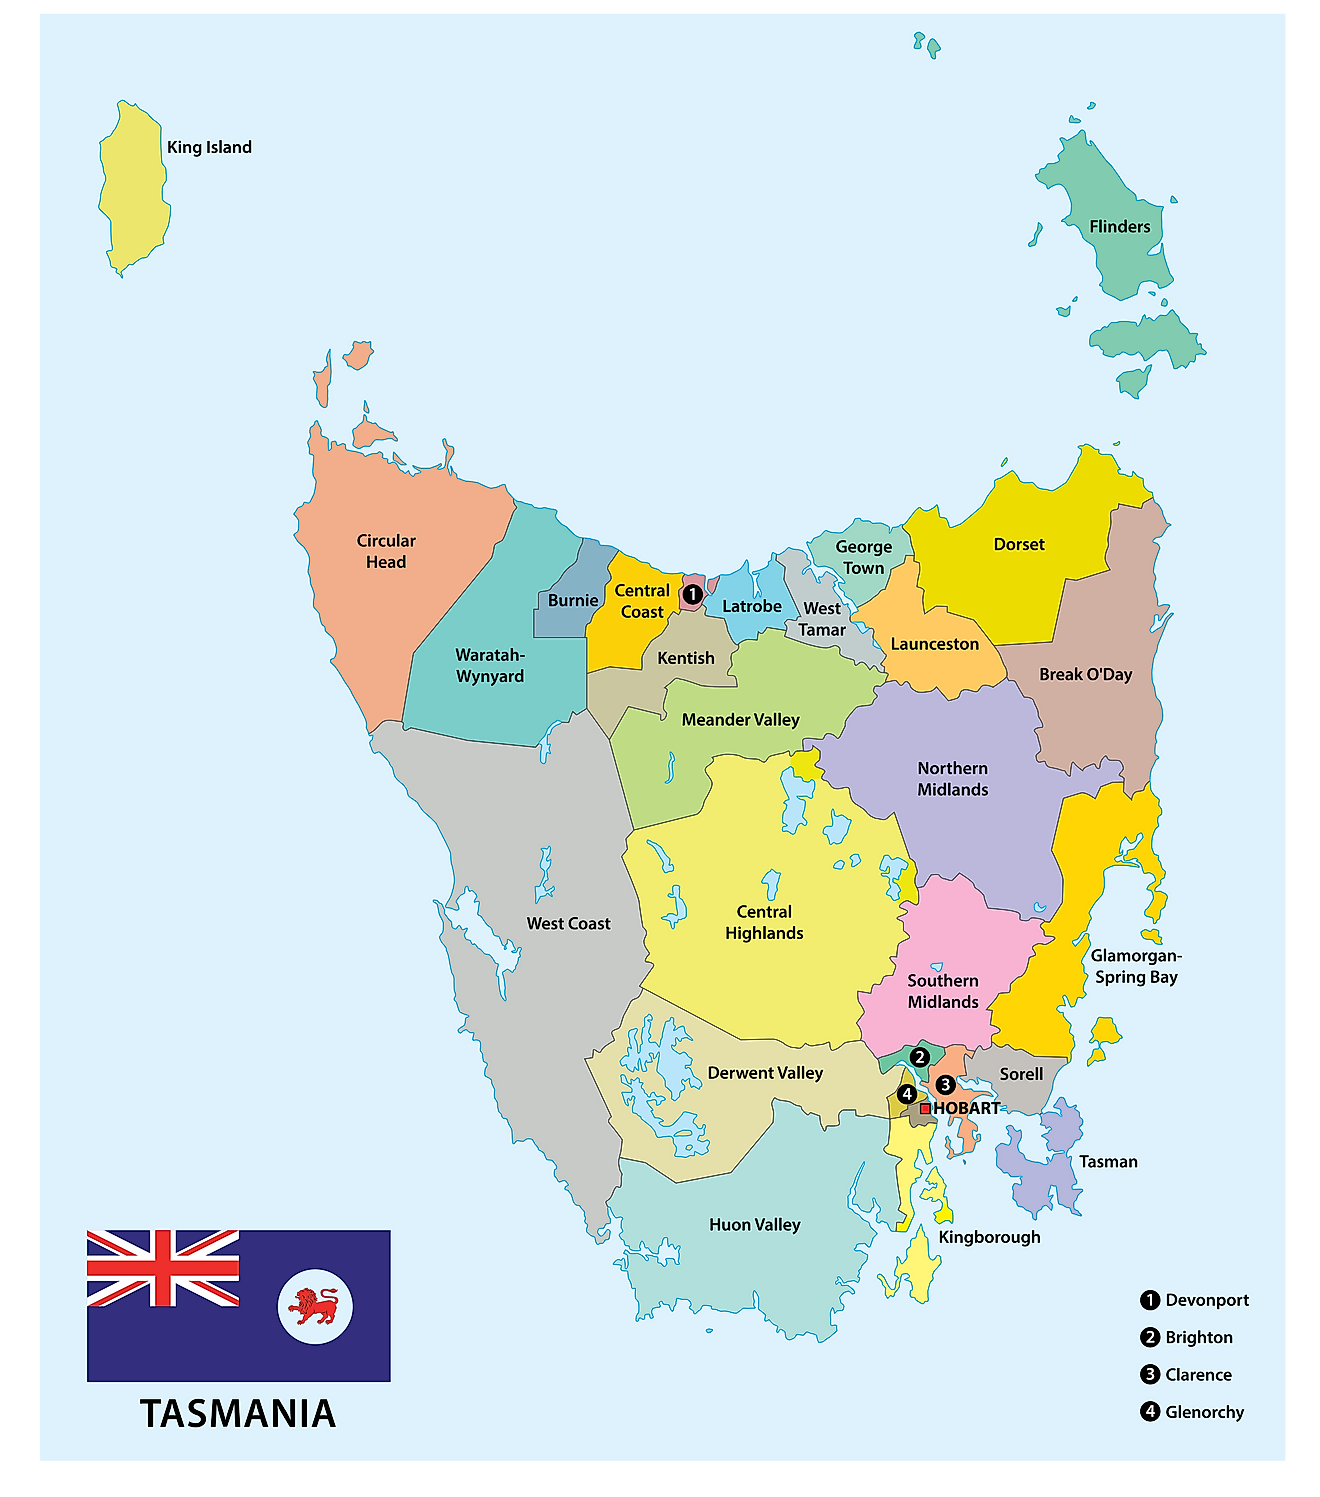 Administrative Map of Tasmania showing its 29 administrative districts and its capital city - Hobart